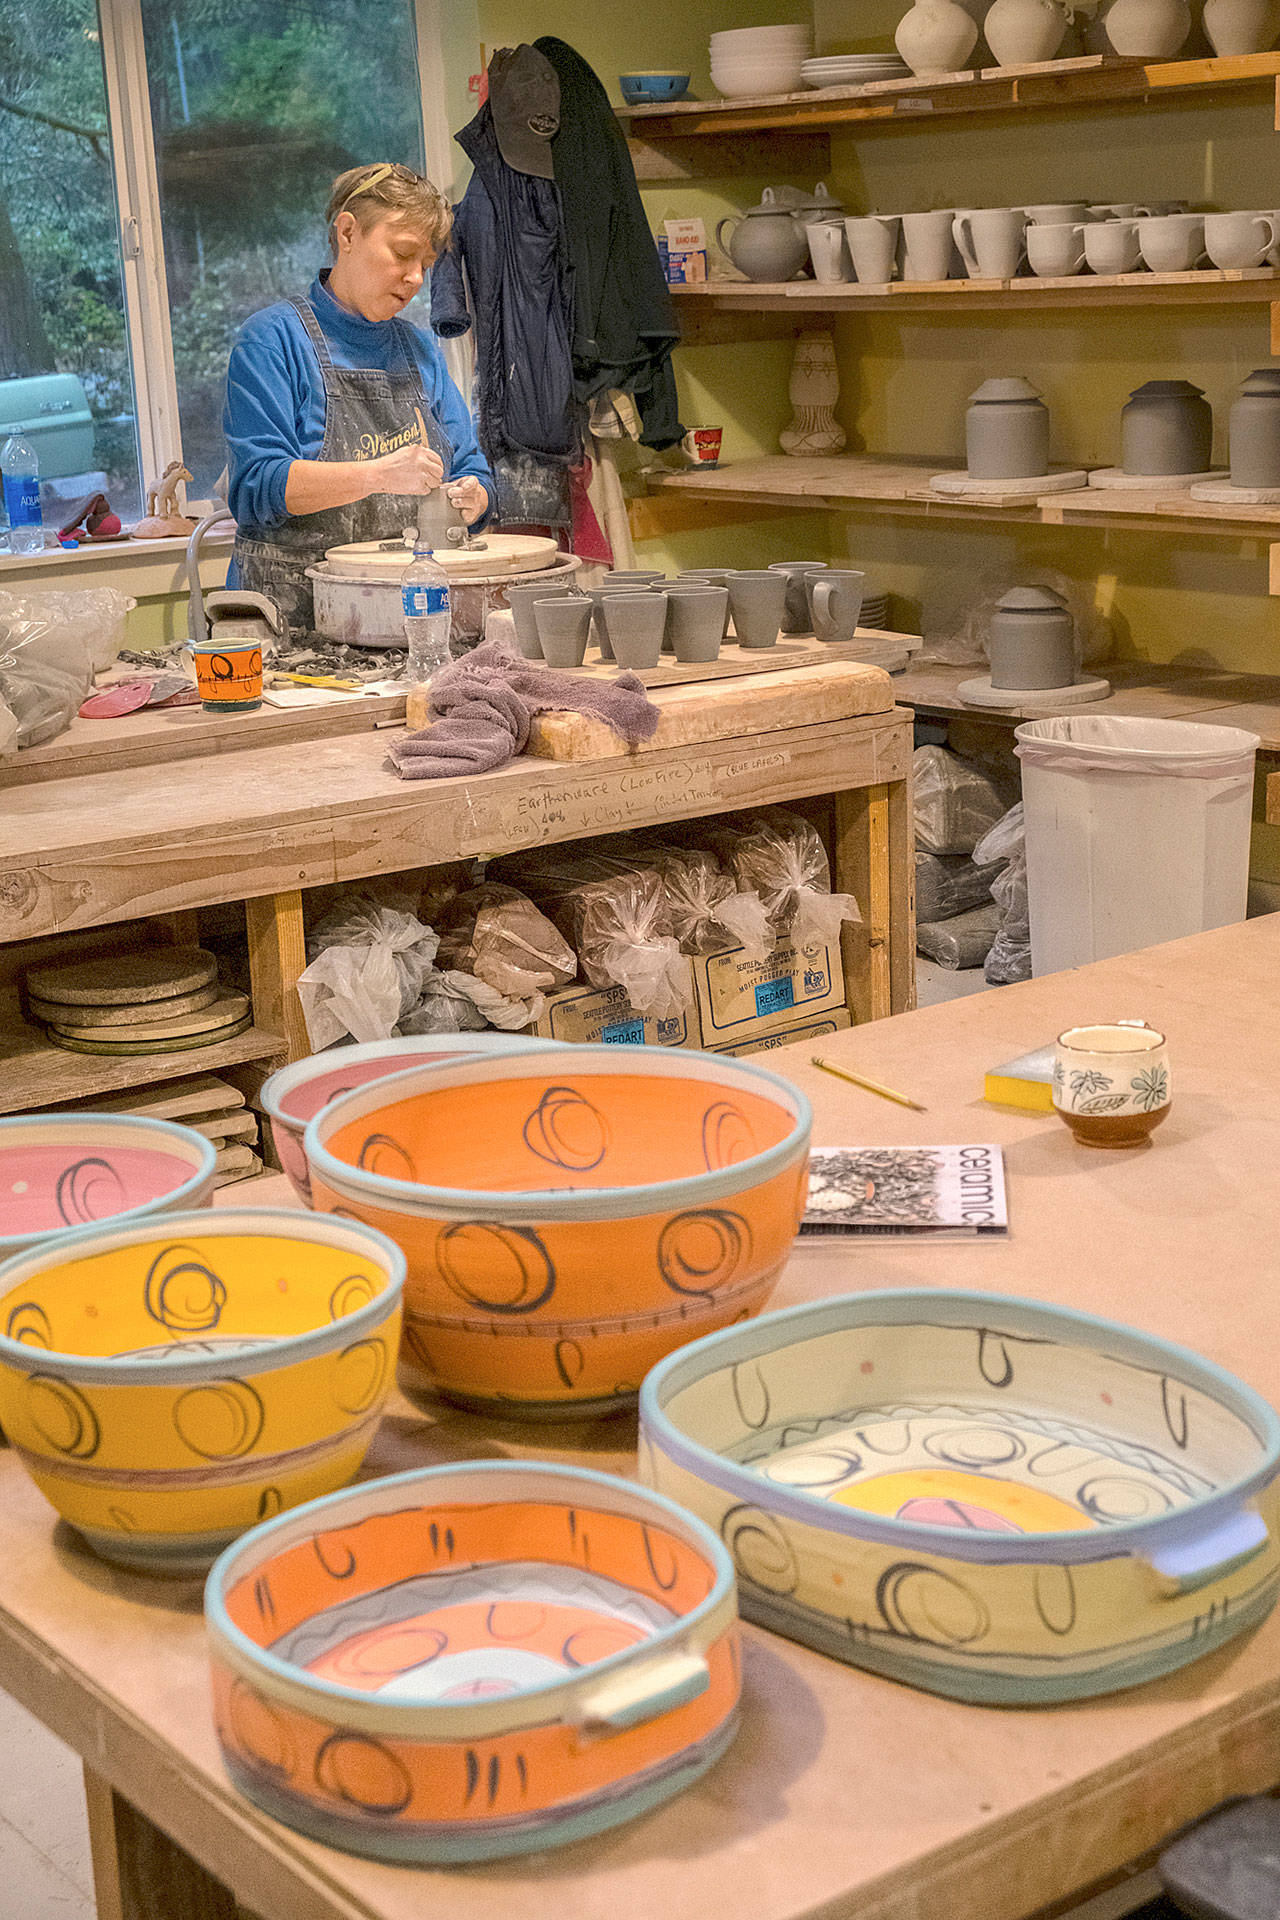 Liz Lewis, one of the founders of Vashon’s semi-annual art studio tour, will once again show her colorful bowls, pots, and dishes in the upcoming tour (Terry Donnelly Photo).